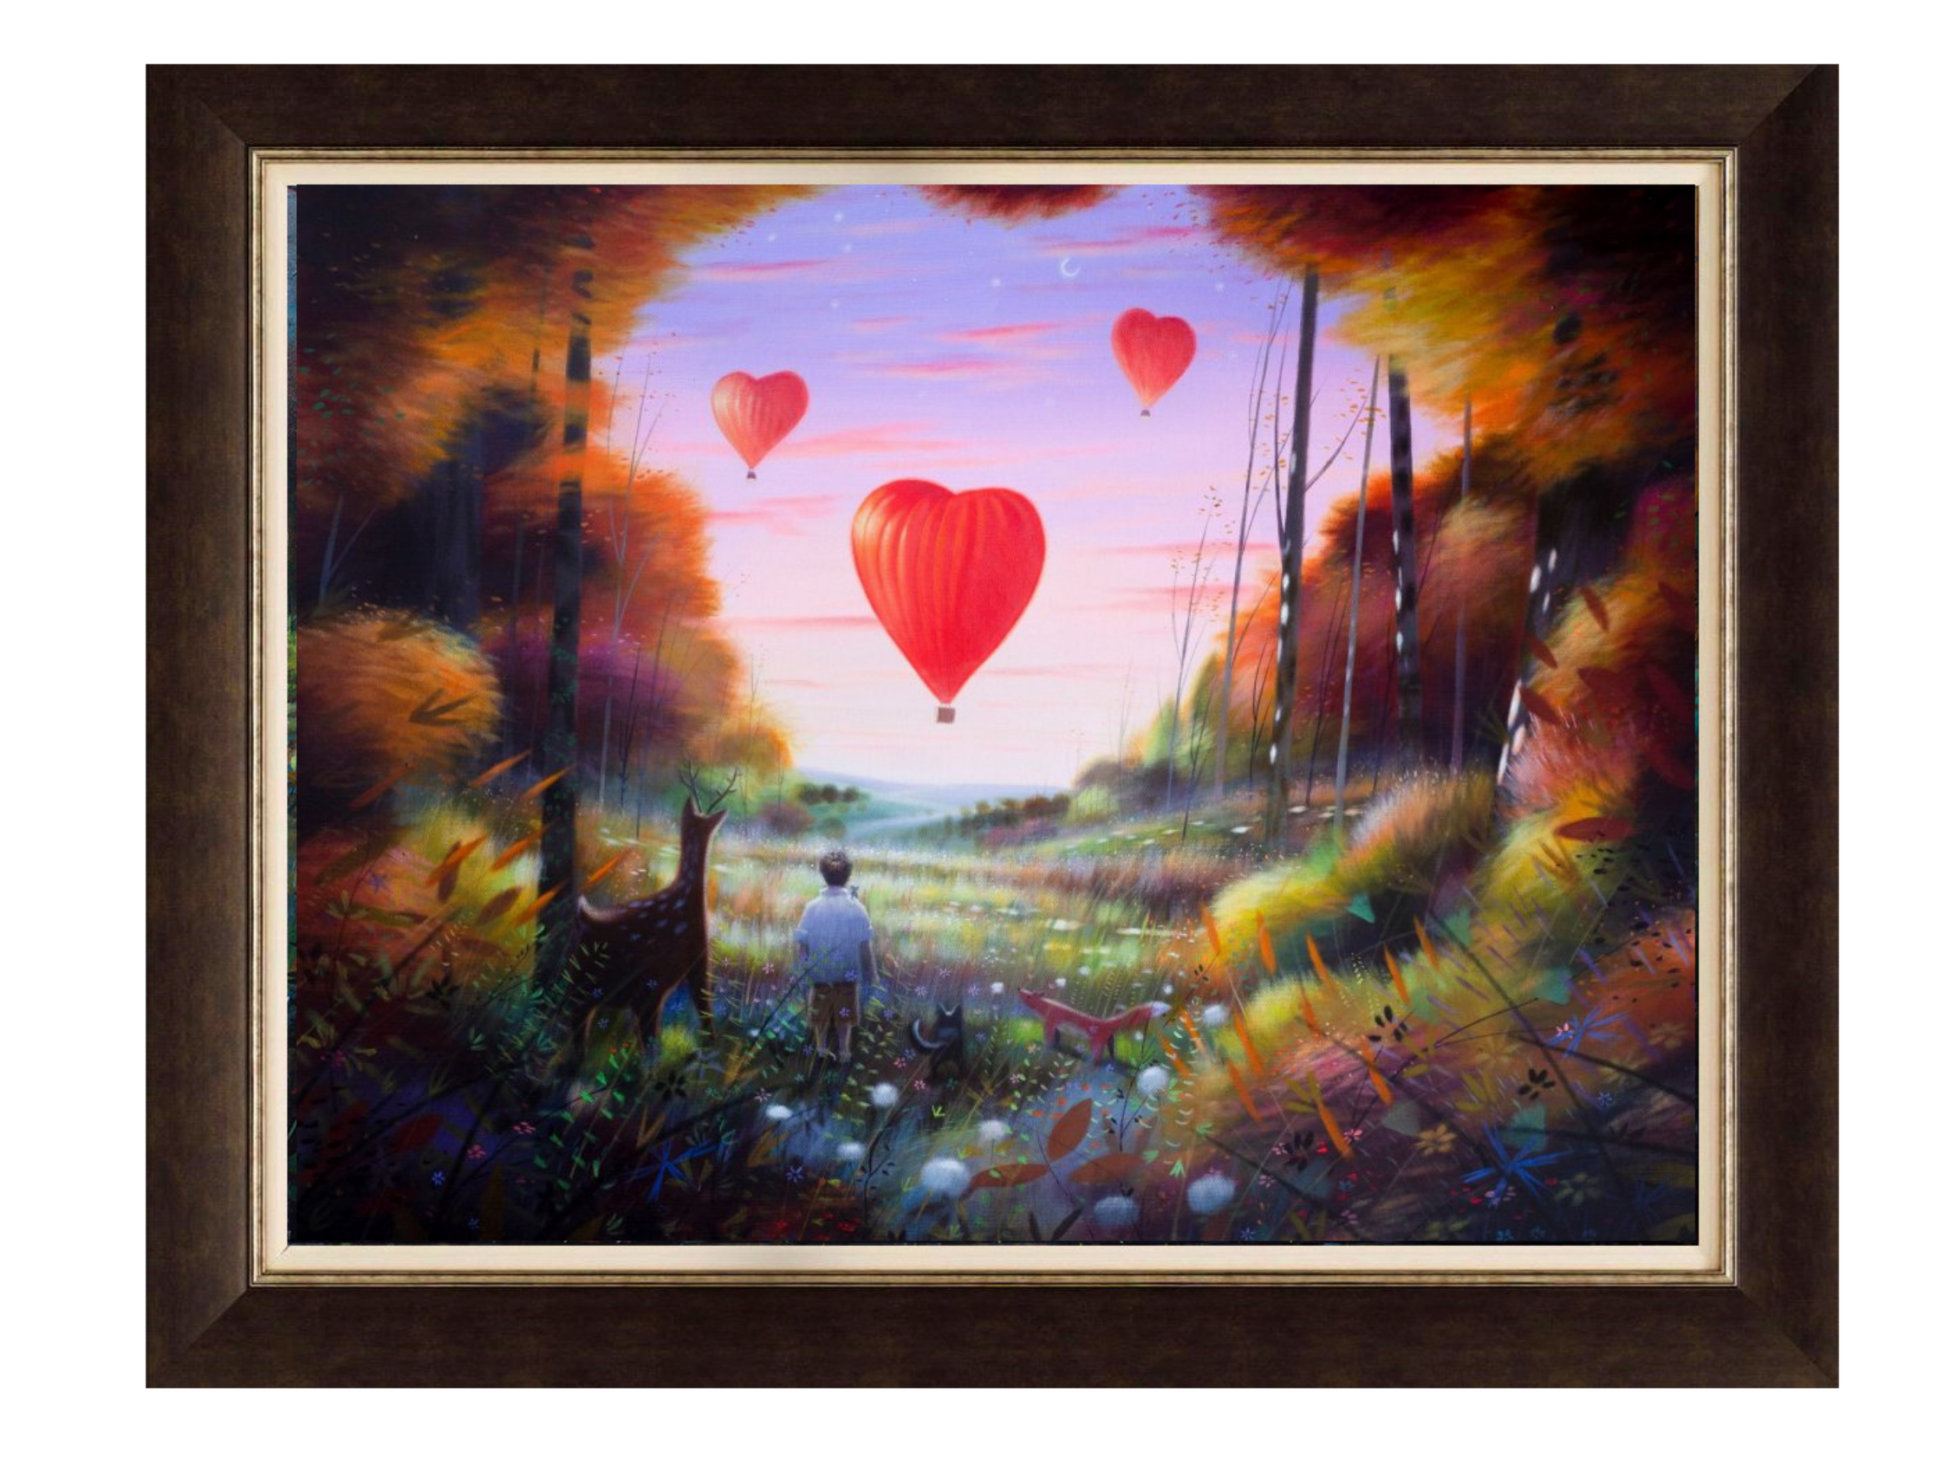 Ryder - 'Love Is In The Air' - Framed Limited Edition Art